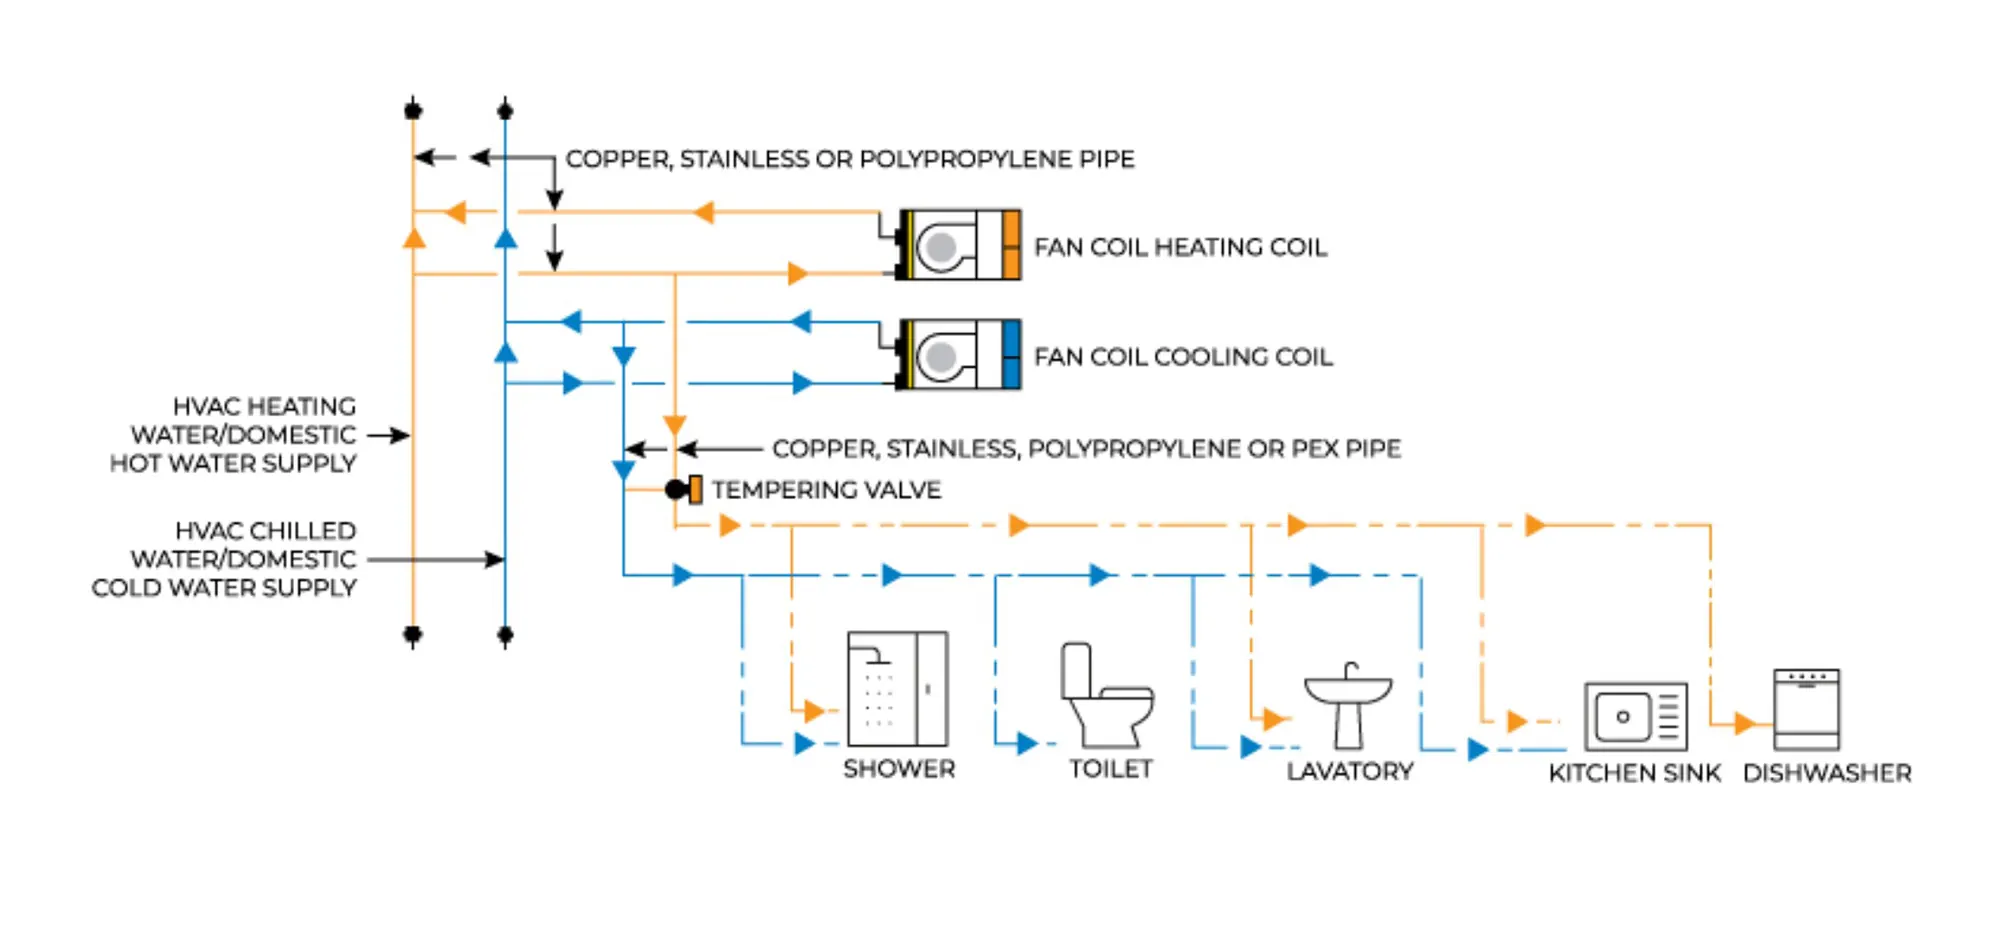 Piping diagram schematic